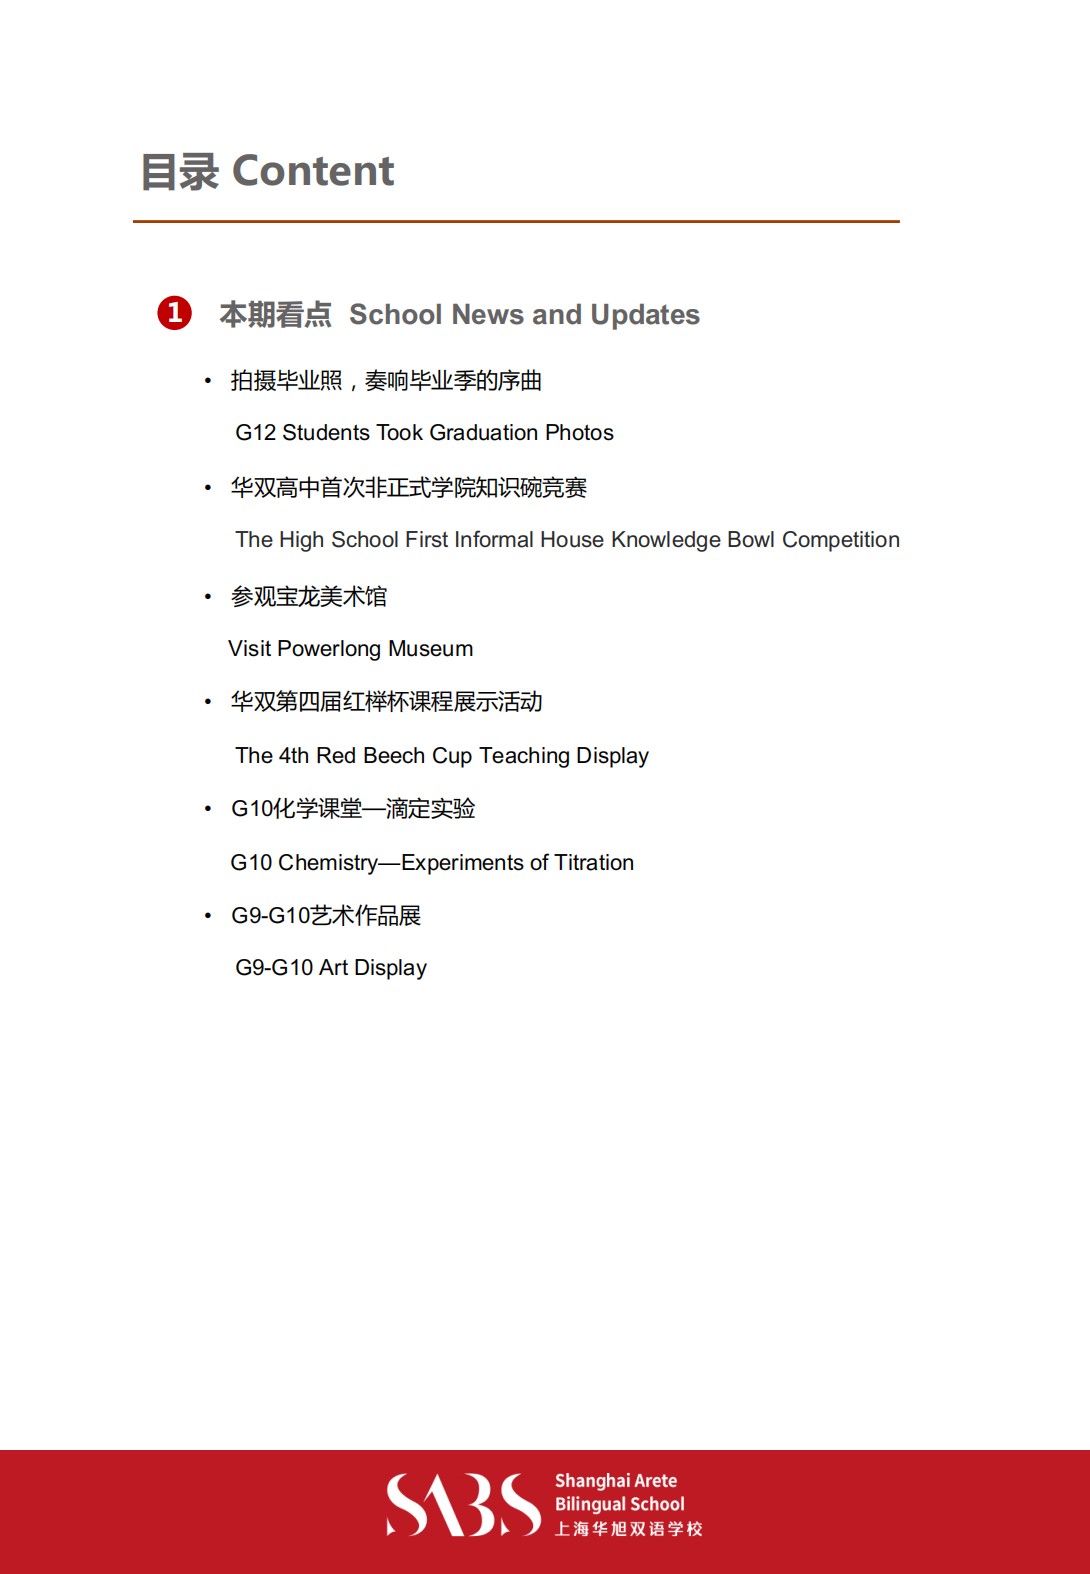 HS 7th Issue Newsletter pptx（Chinese）_01.png